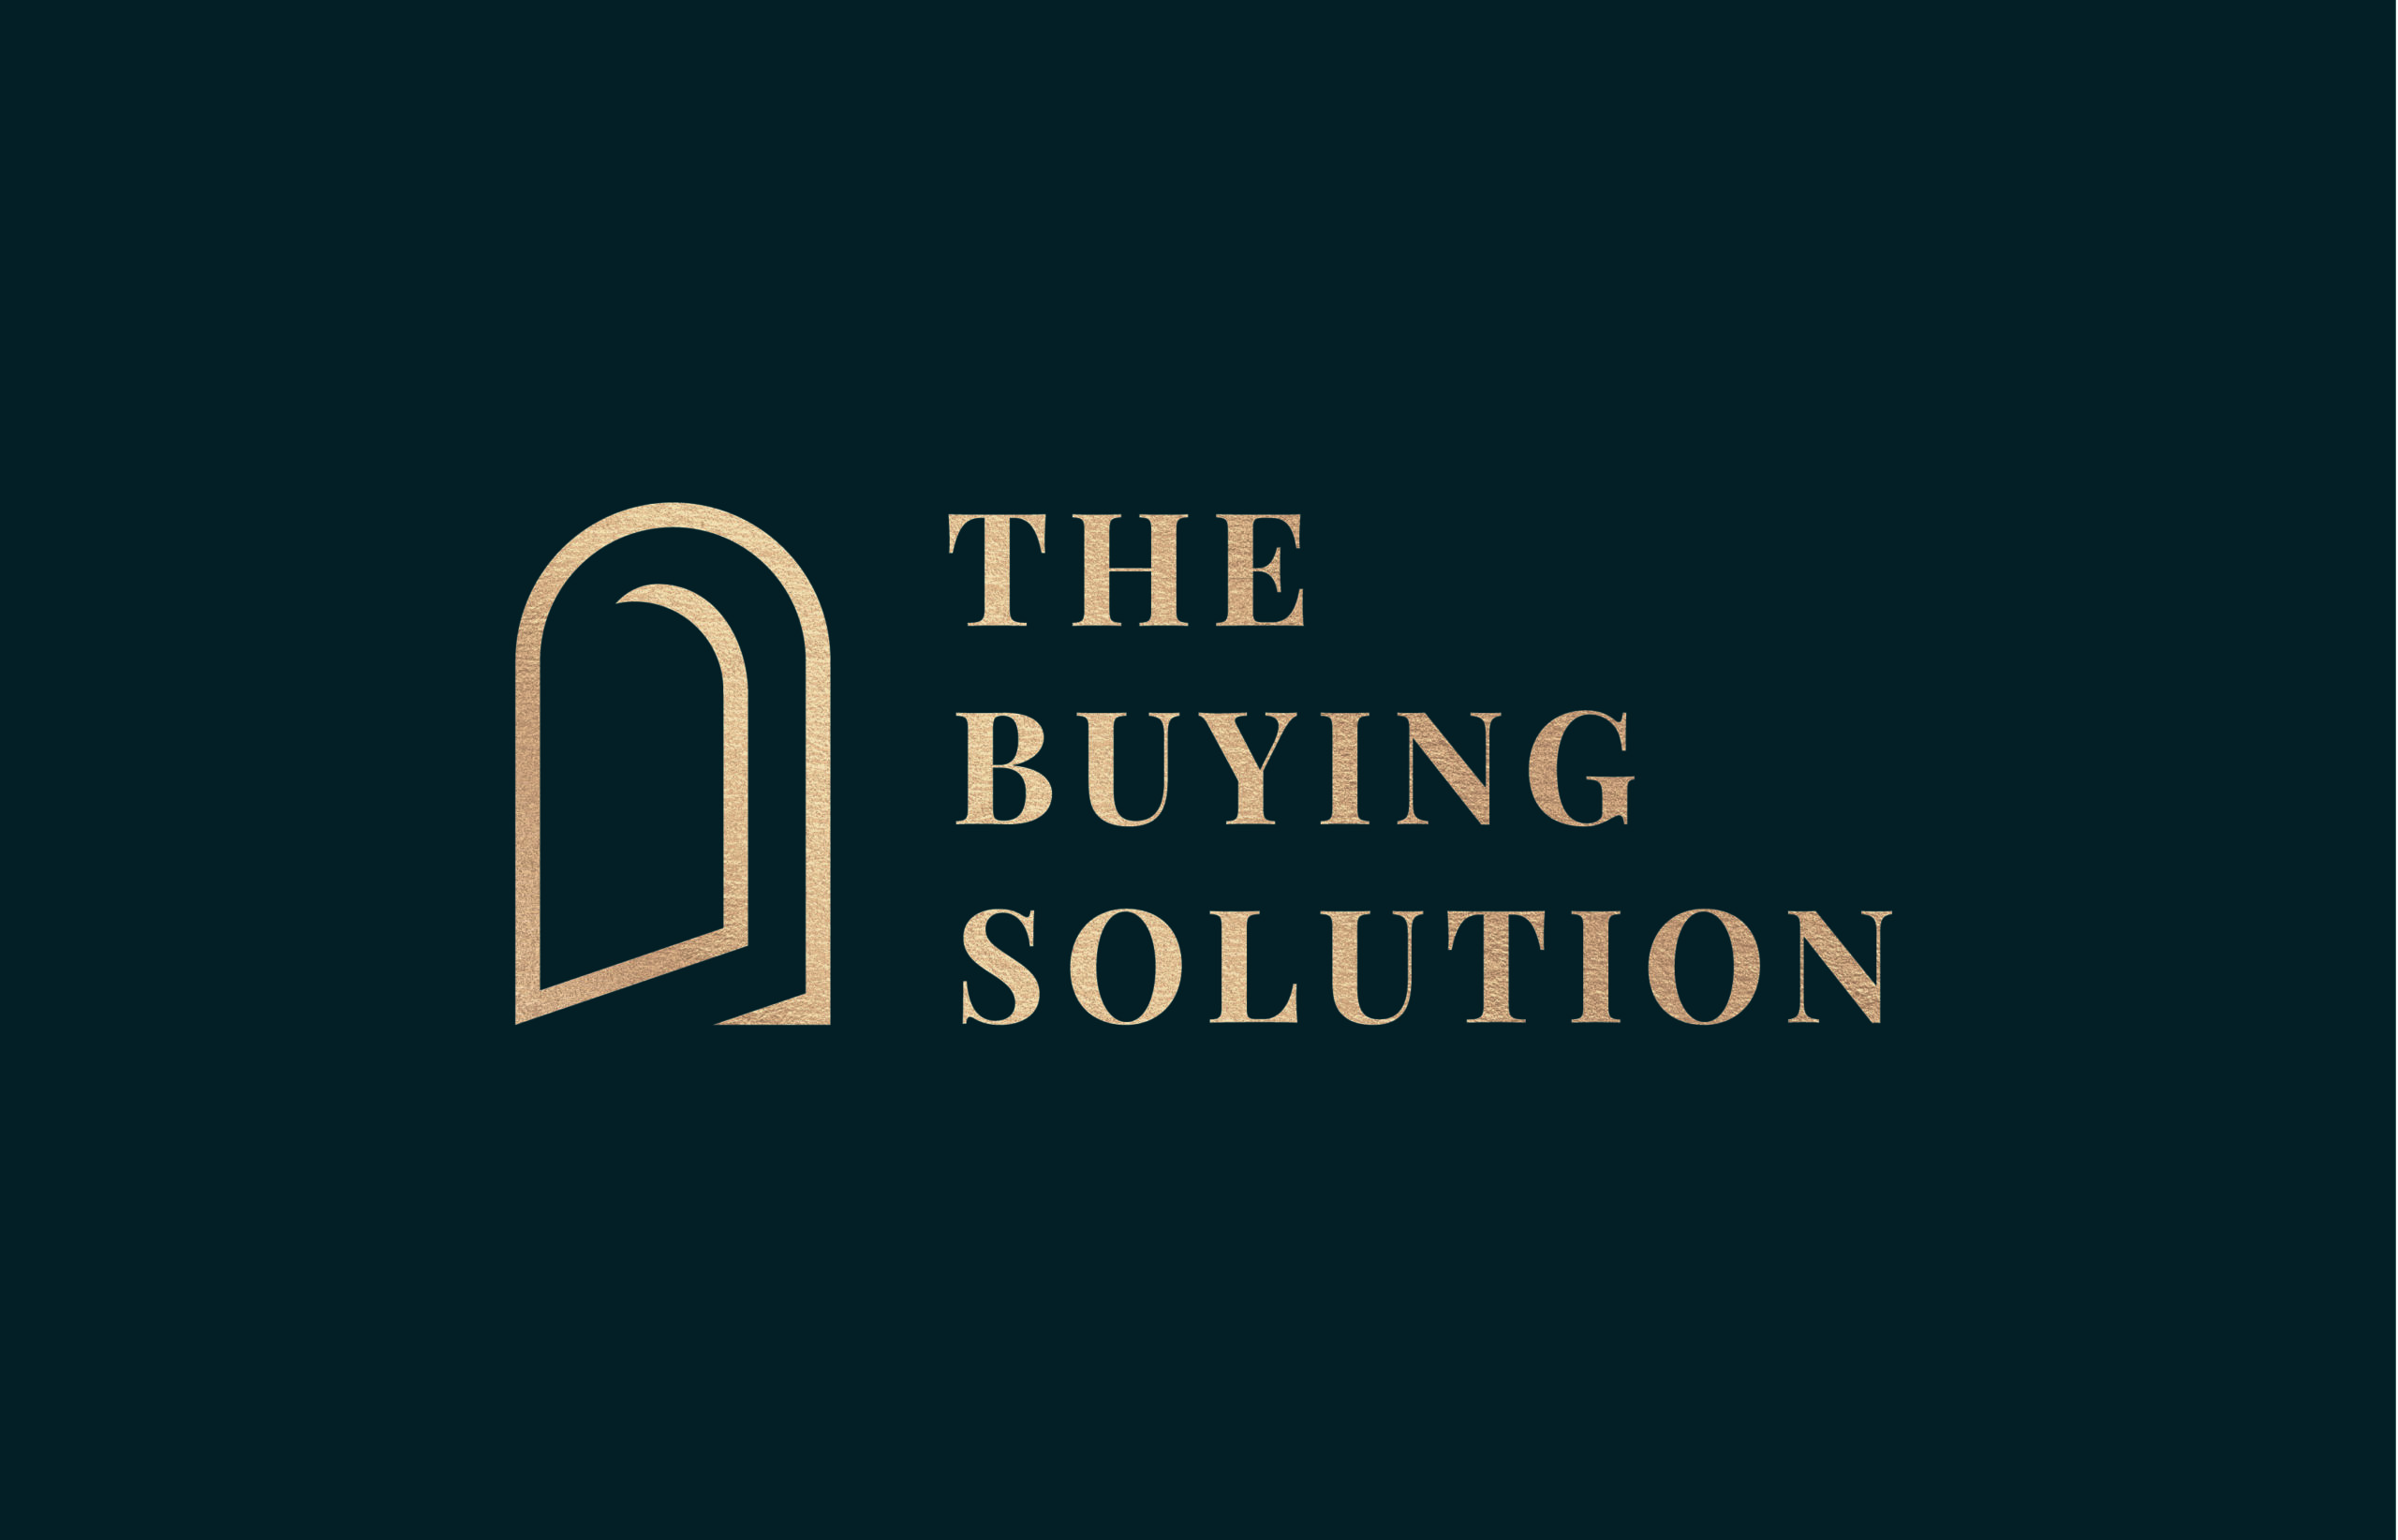 Jonathan Bramwell speaks to Knight Frank on The Buying Solution’s bespoke buying agency service